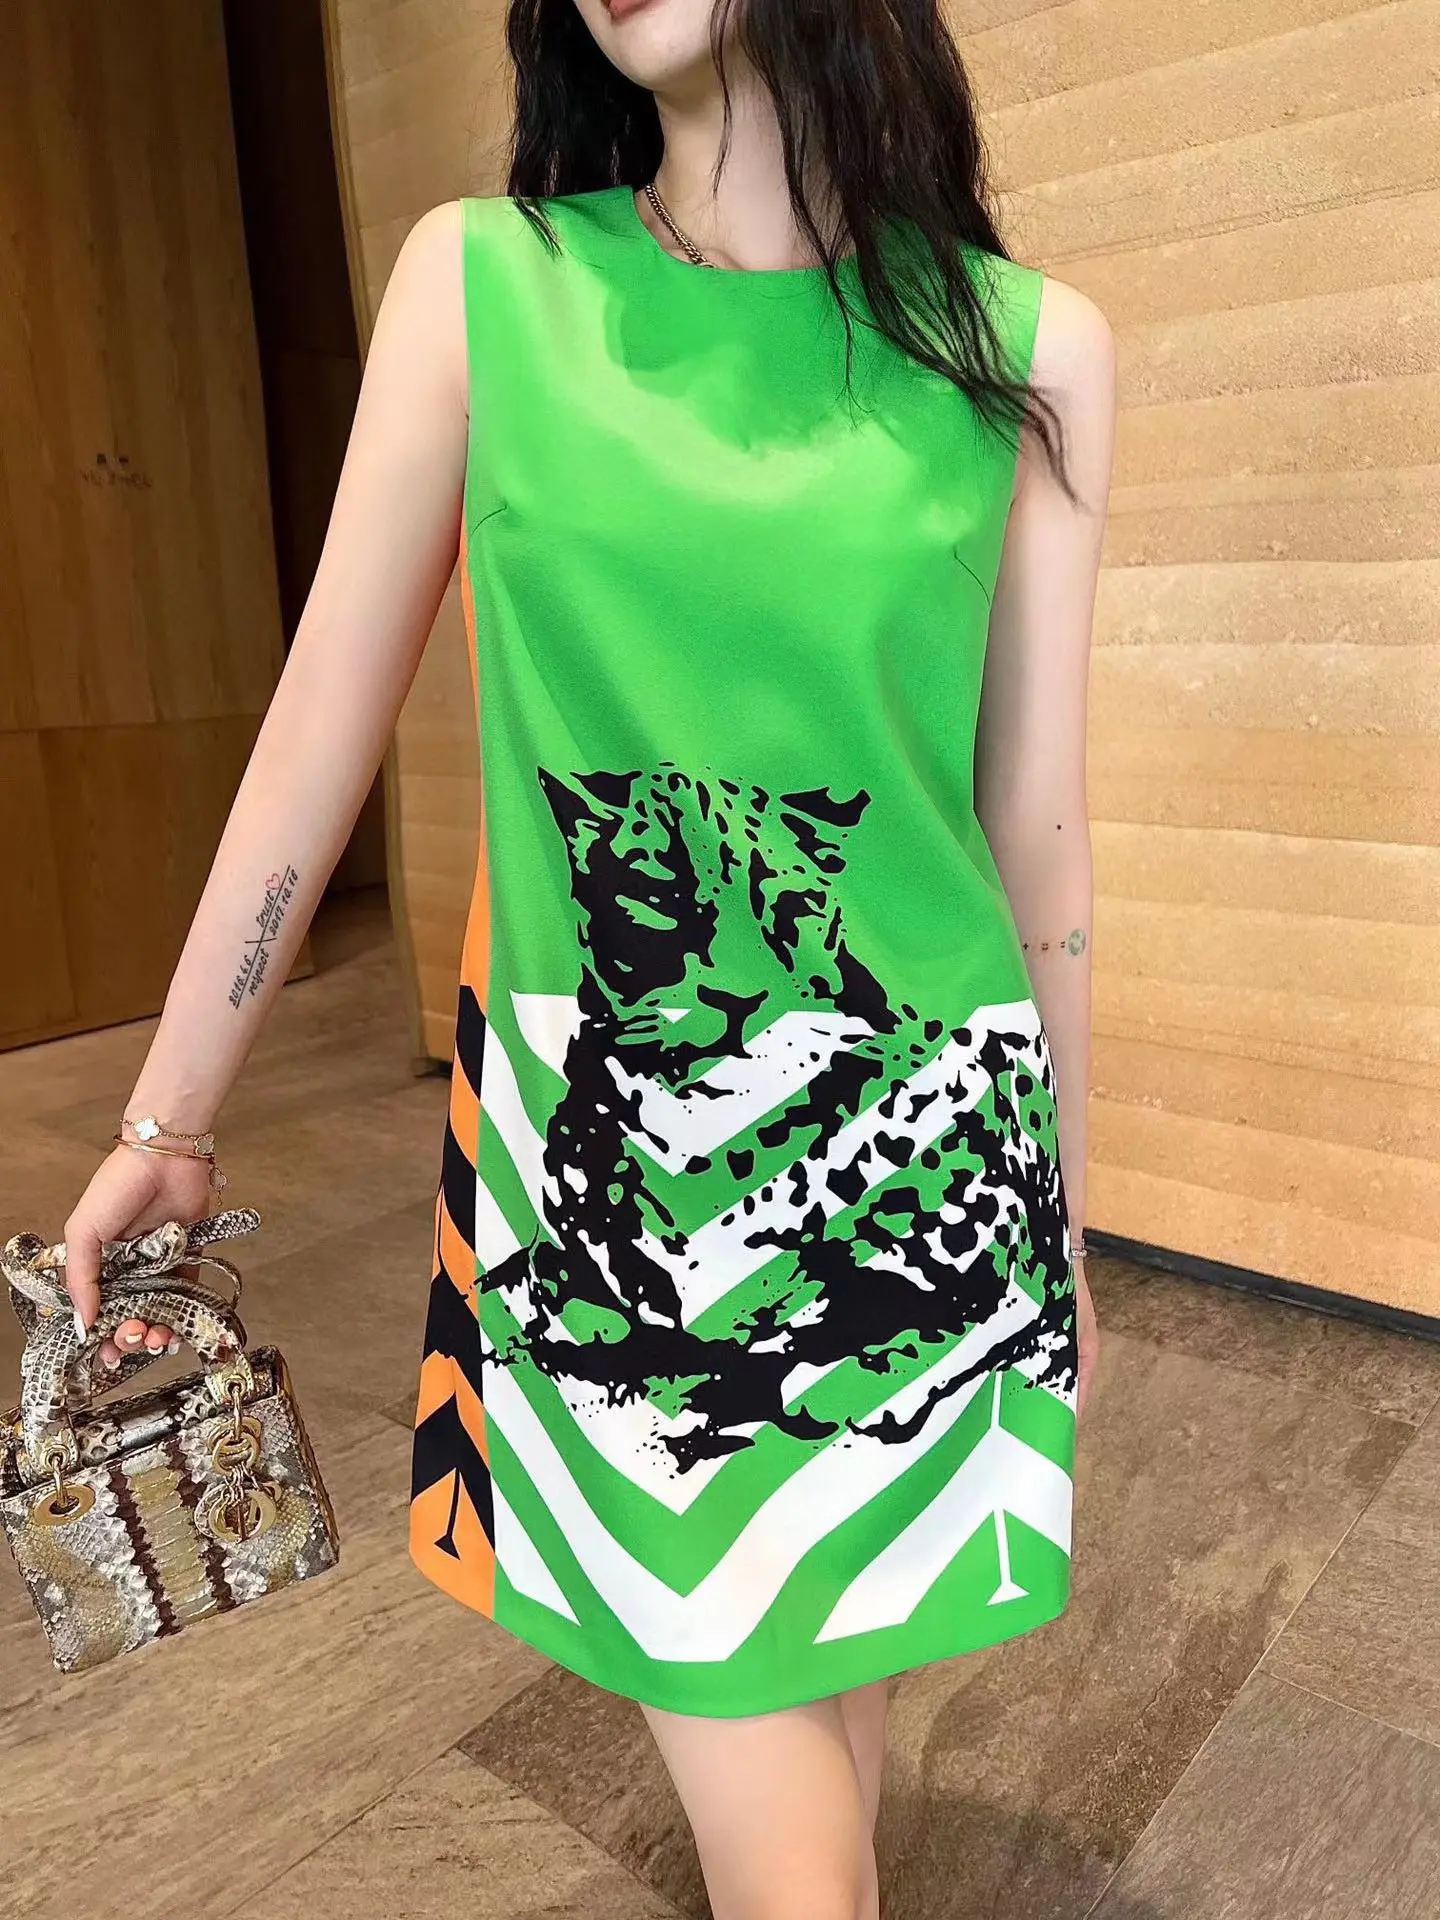 22SS latest style sleeveless dress heavy industry positioning color printing design with black elements to create seal leopard p